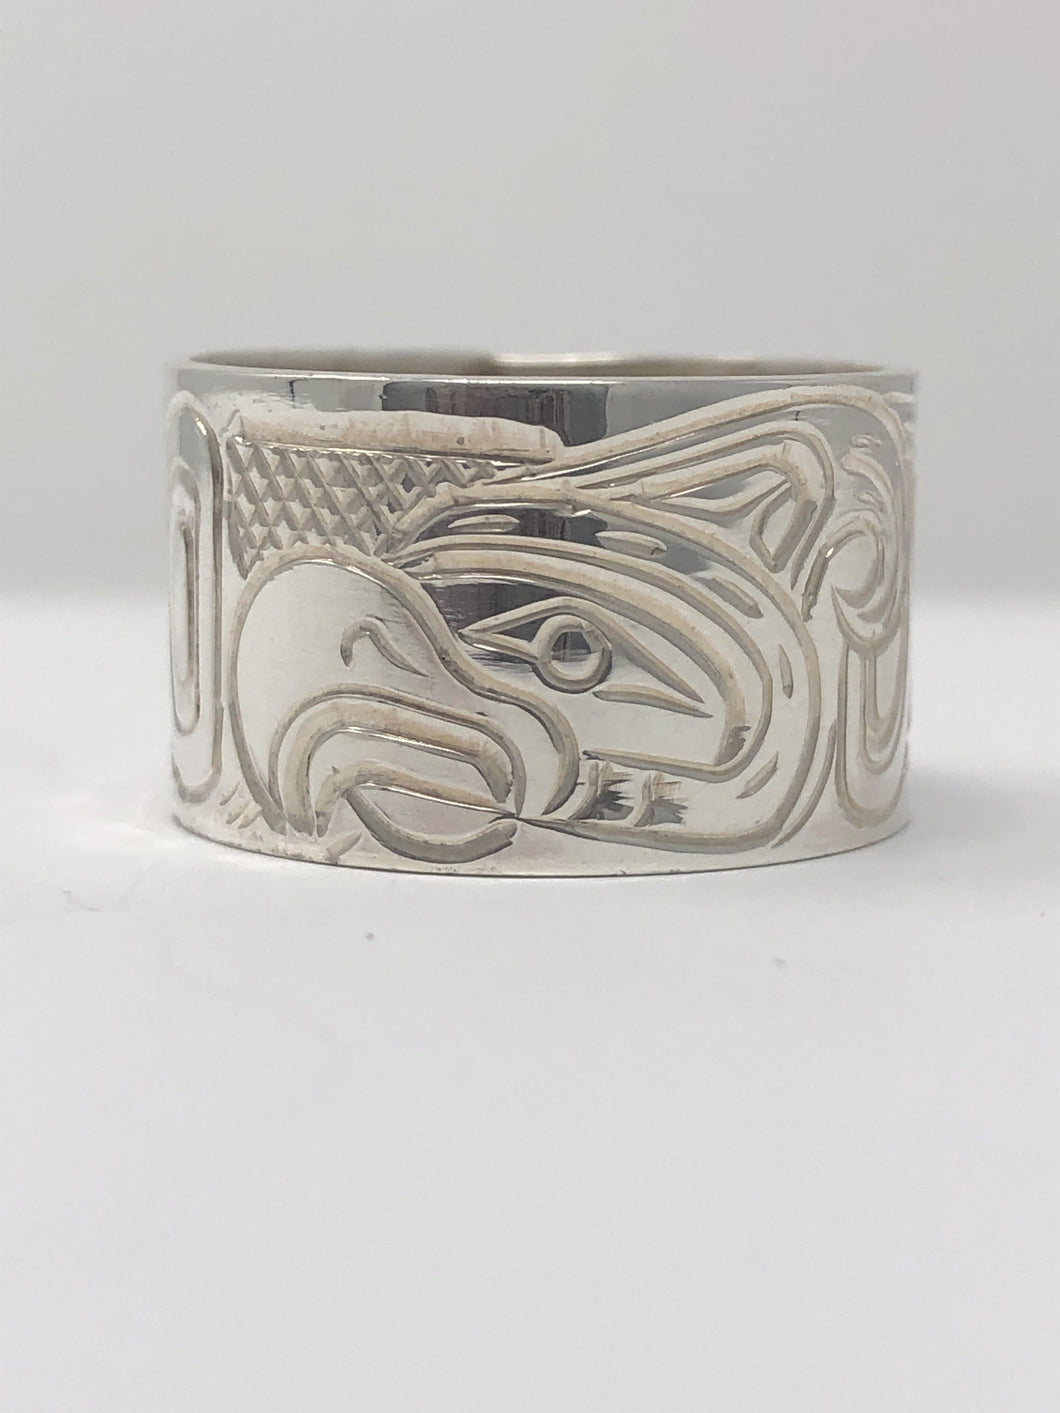 1/2” Thunderbird Ring - Size 9 By Billy Cook